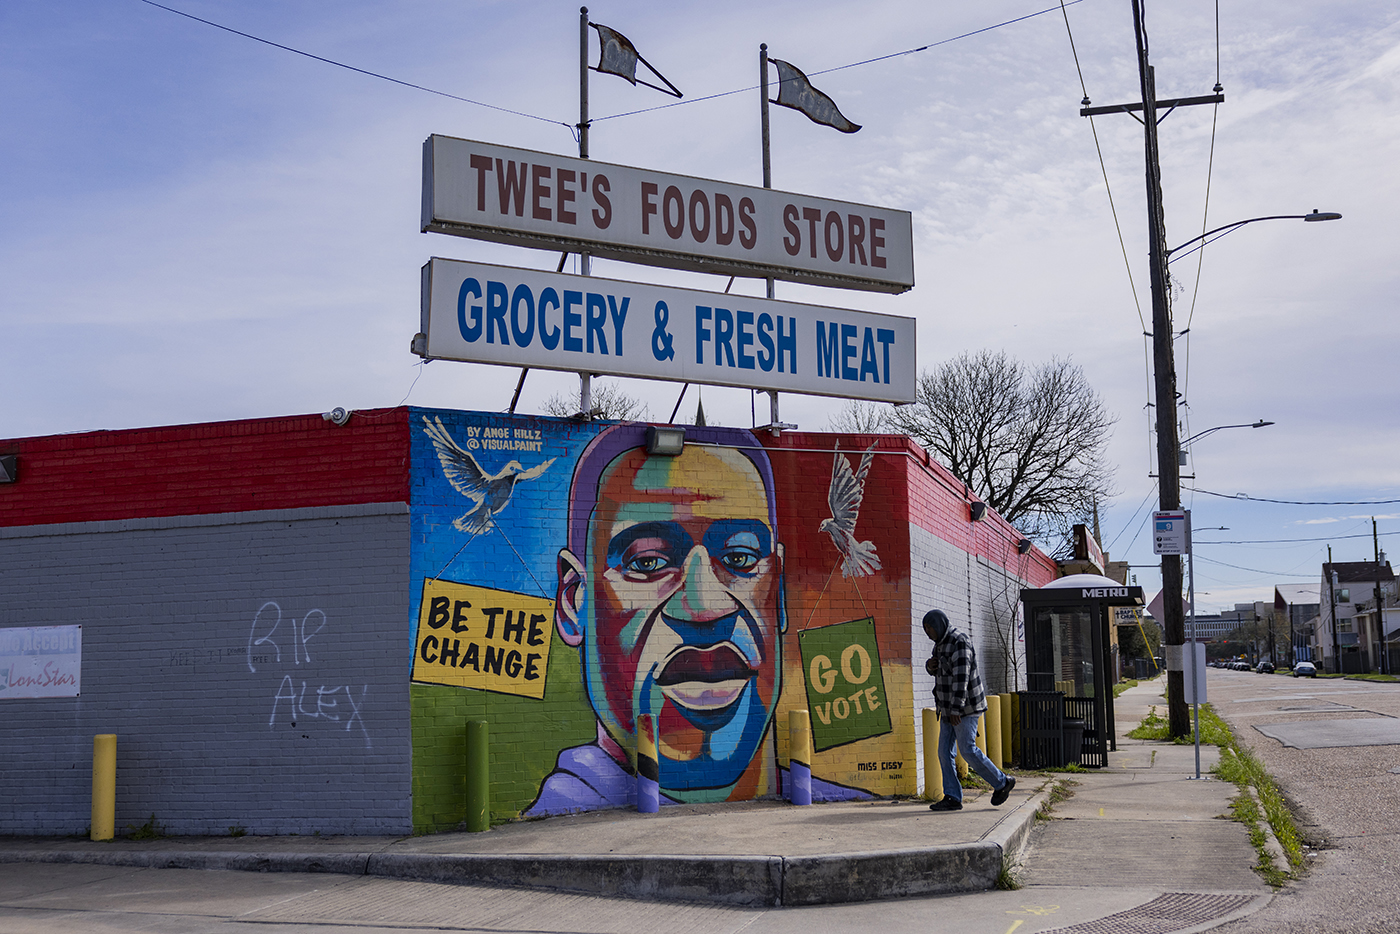 Twee's Corner Food Mart in Houston's Third Ward, a neighborhood that is a food desert for many local residents.